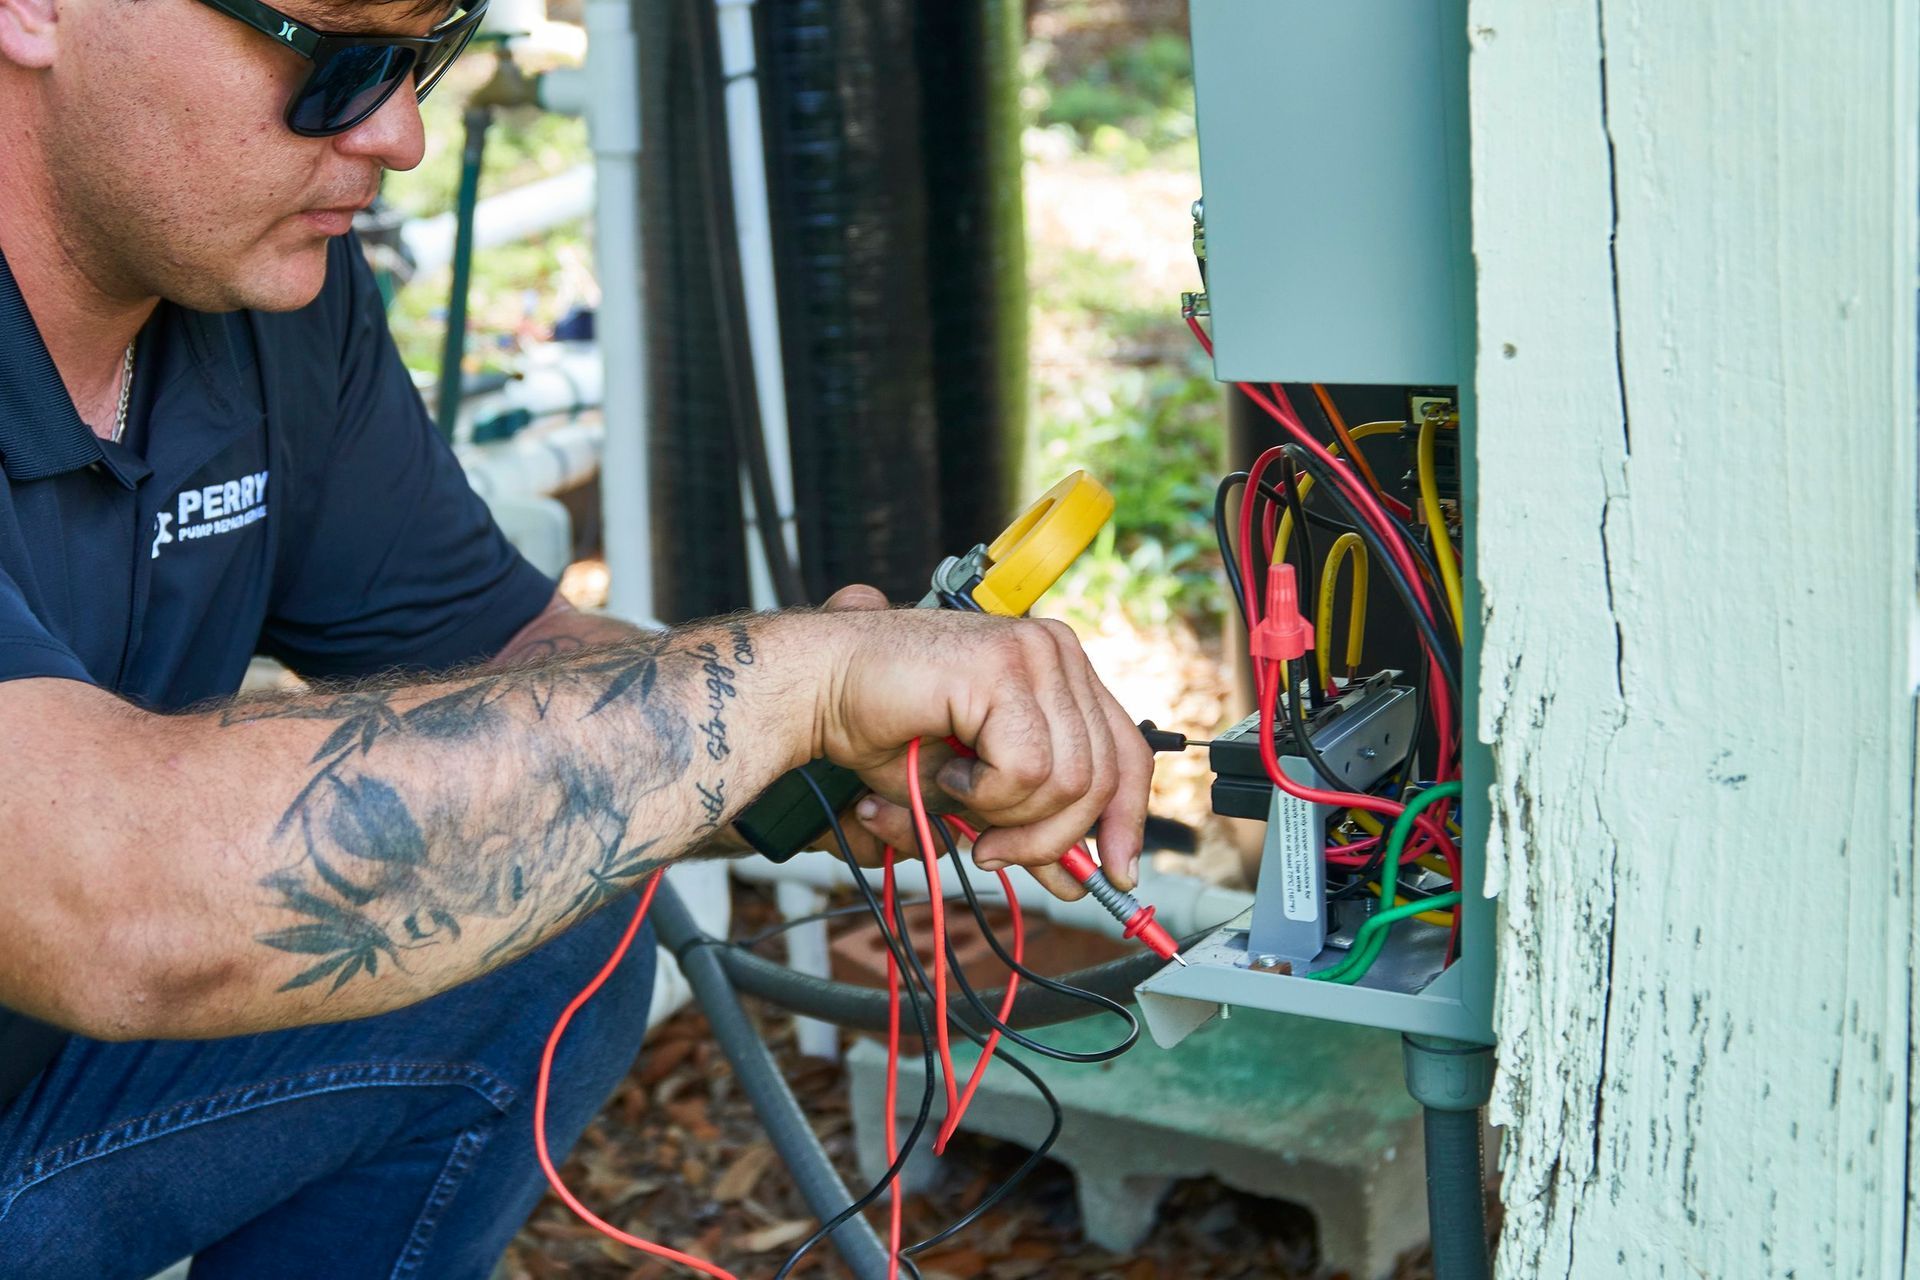 A man is working on an electrical box with a voltage meter.